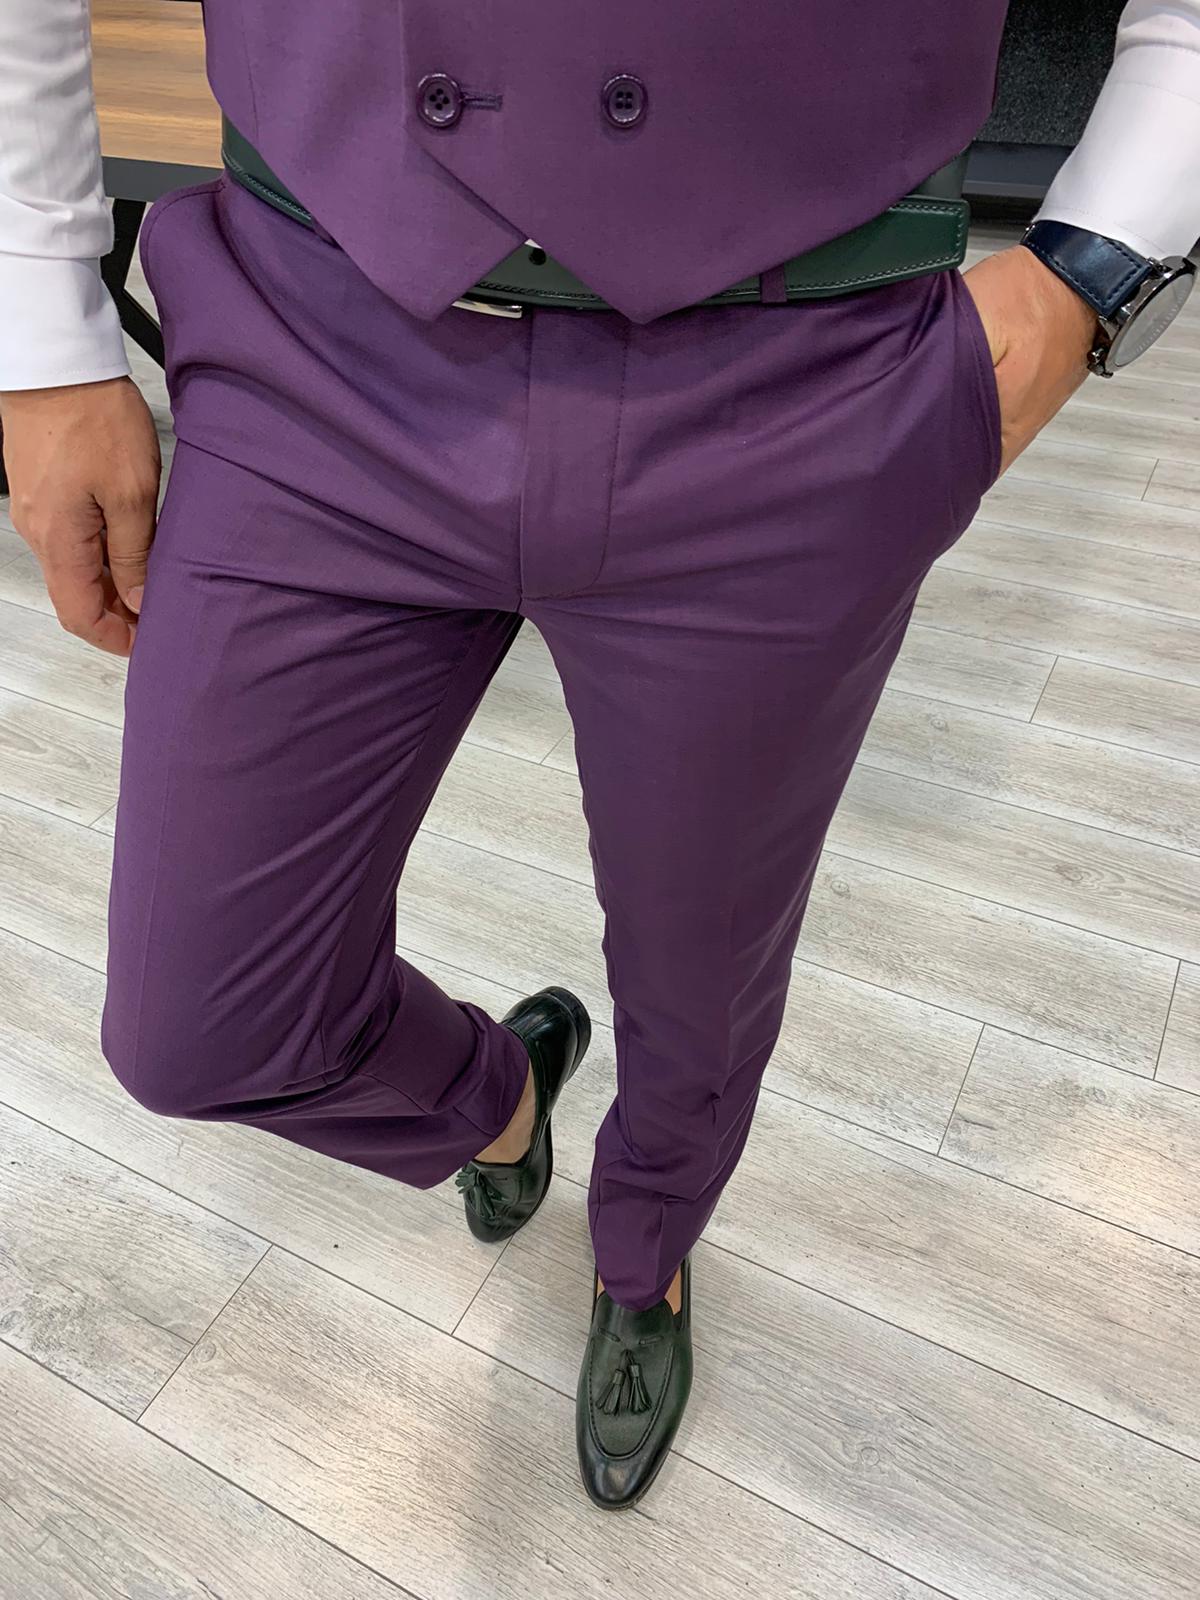 Mens Solid Suit Pants Business Casual Straight Pants Fashion Elegant Dress  Trousers Work Office Pants with Pockets Purple at Amazon Men's Clothing  store